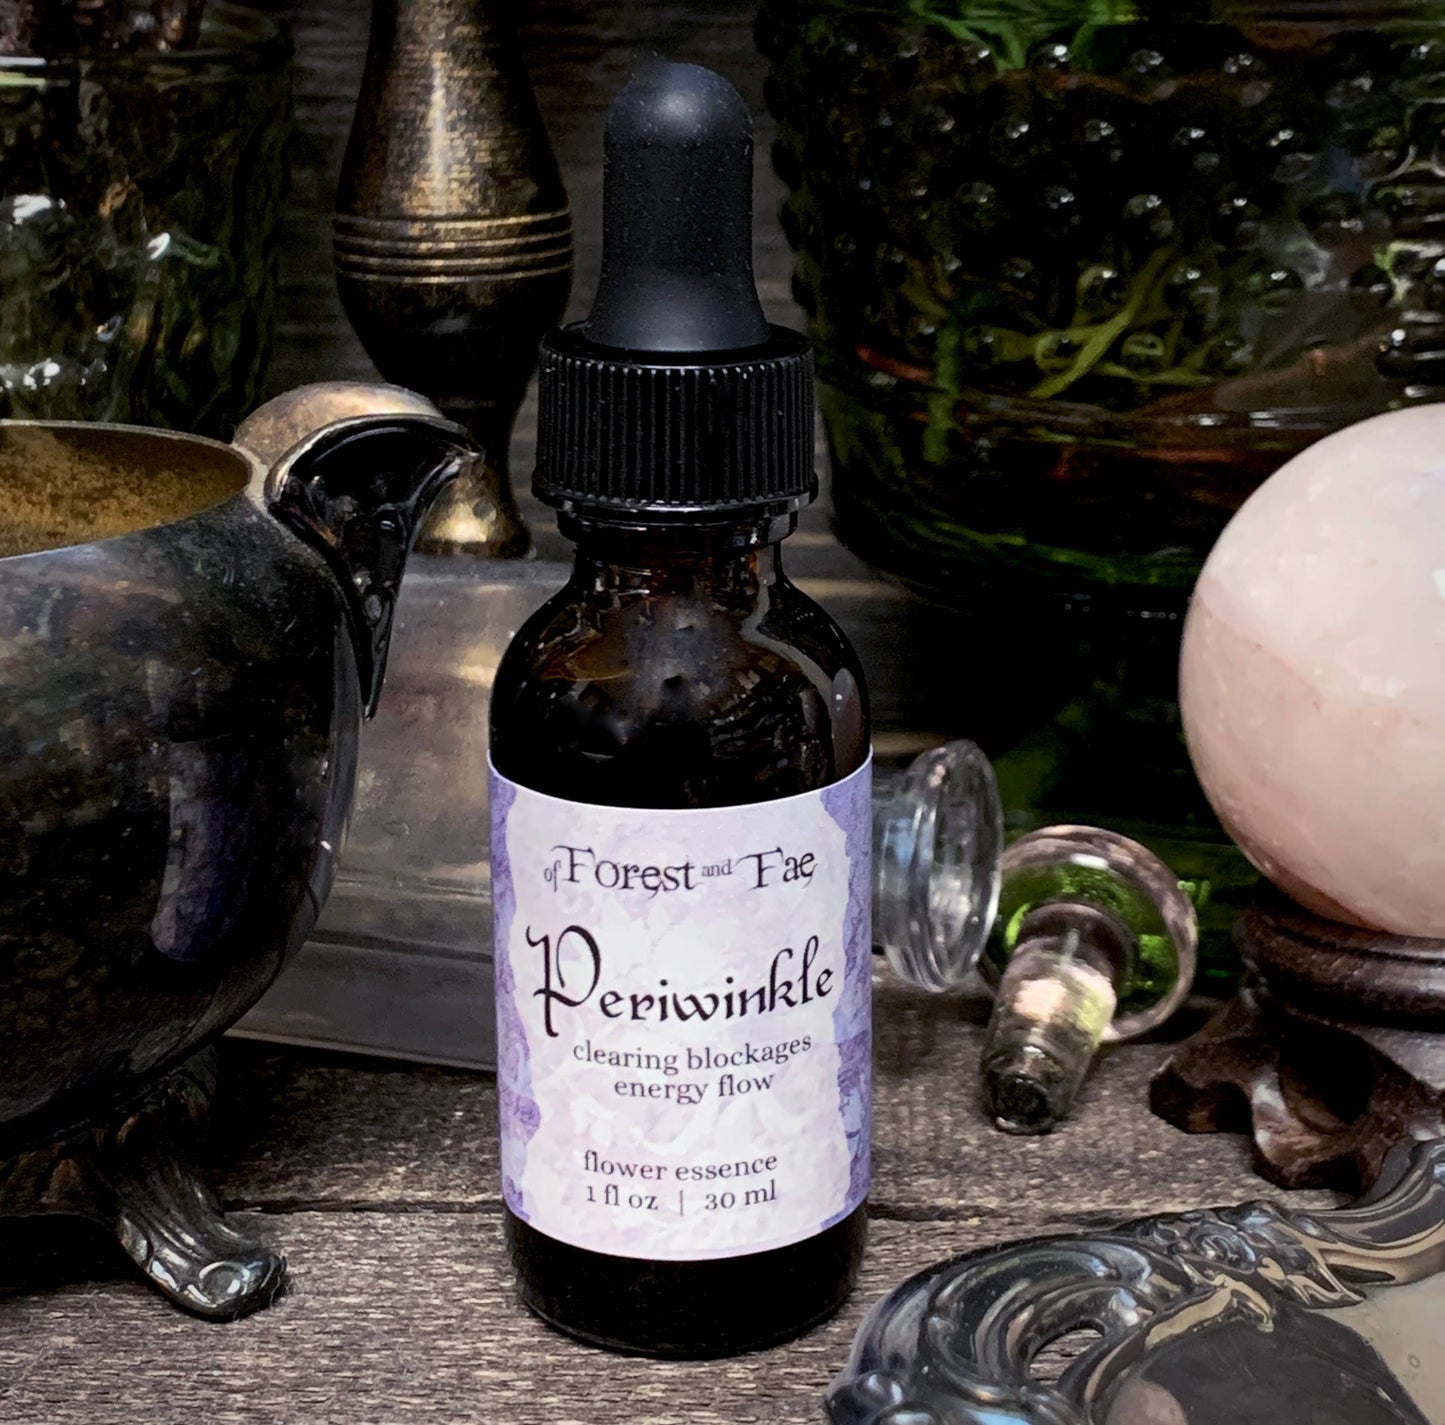 Energy Flow • Periwinkle flower essence • Witchy Intuition